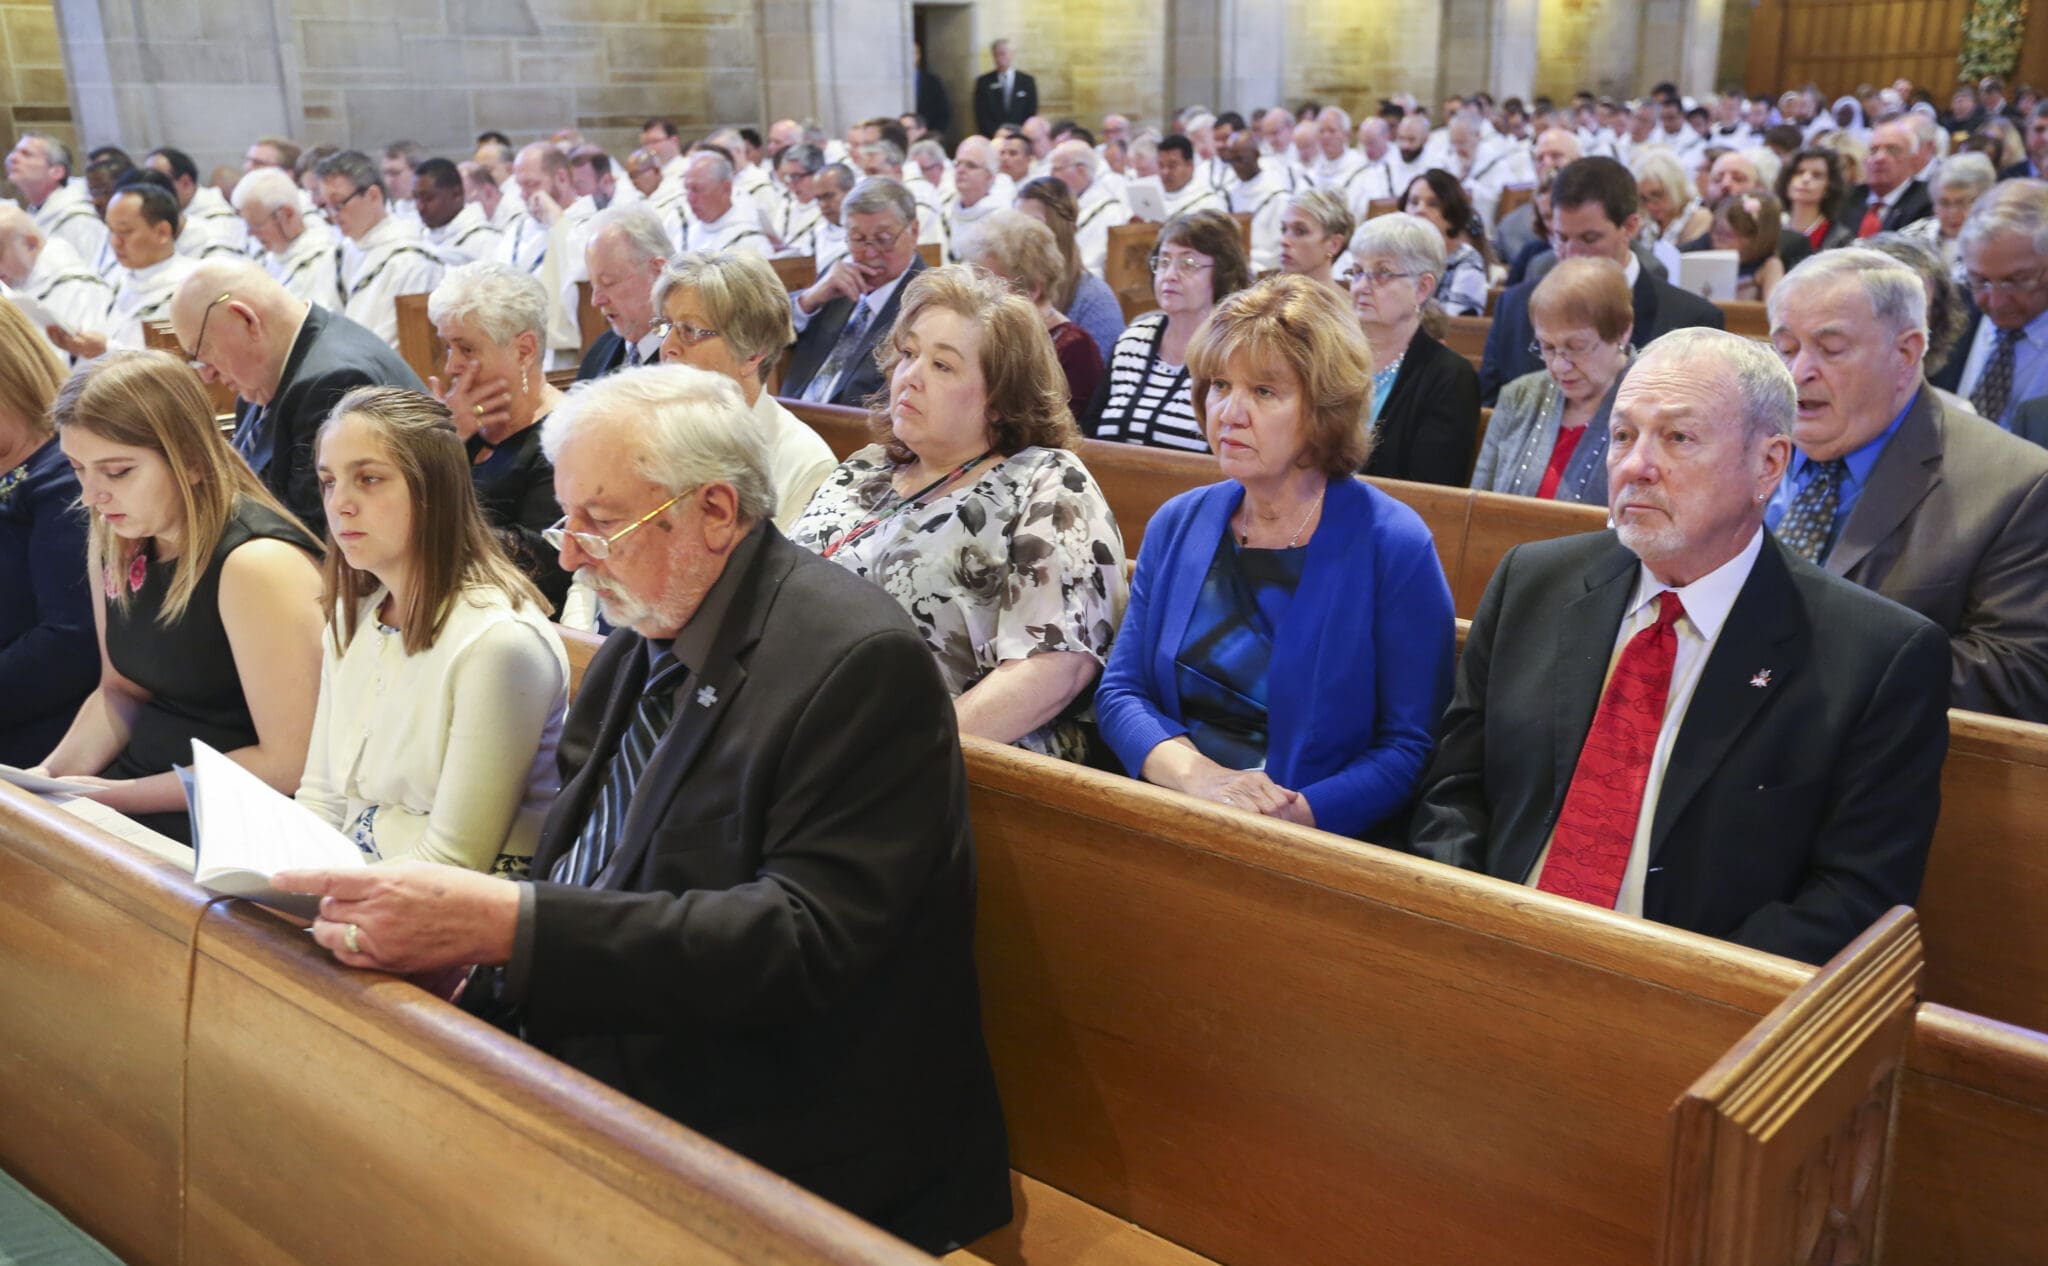 Relatives and friends of Bishop Joel M. Konzen, SM, filled the front pews on the right side of the Cathedral of Christ the King, Atlanta, during his April 3 episcopal ordination. Photo By Michael Alexander